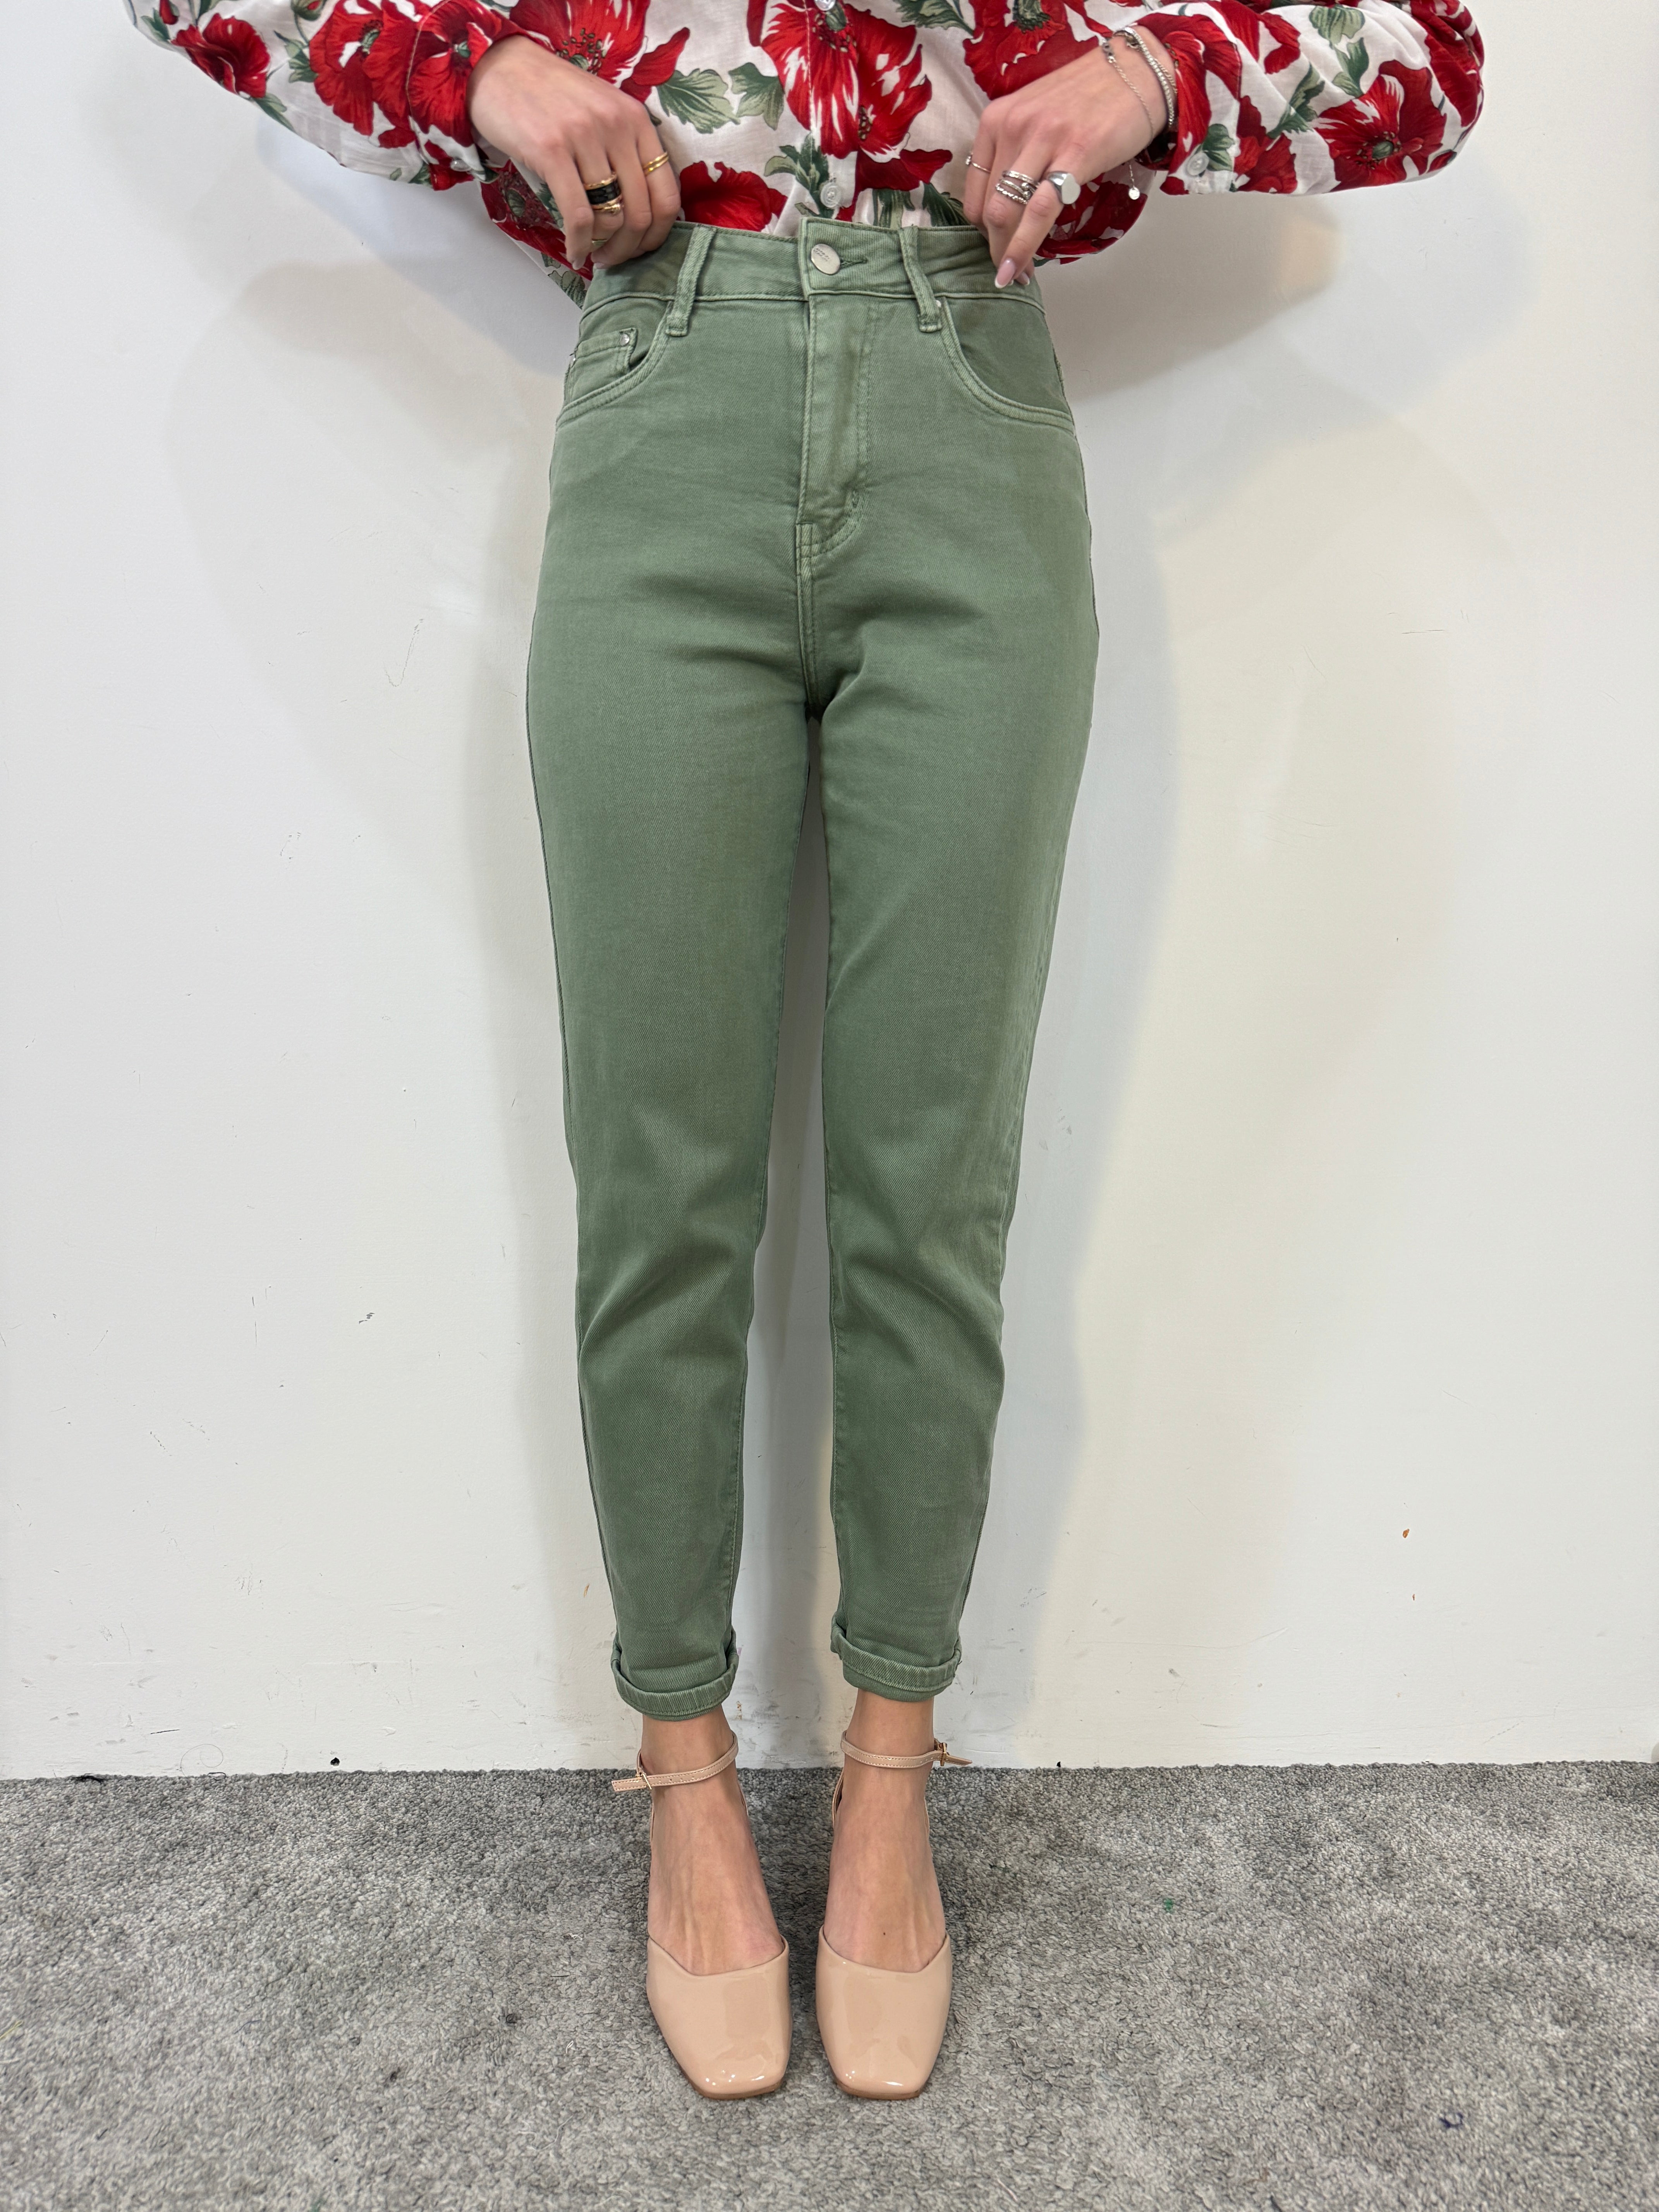 Jeans slouchy green